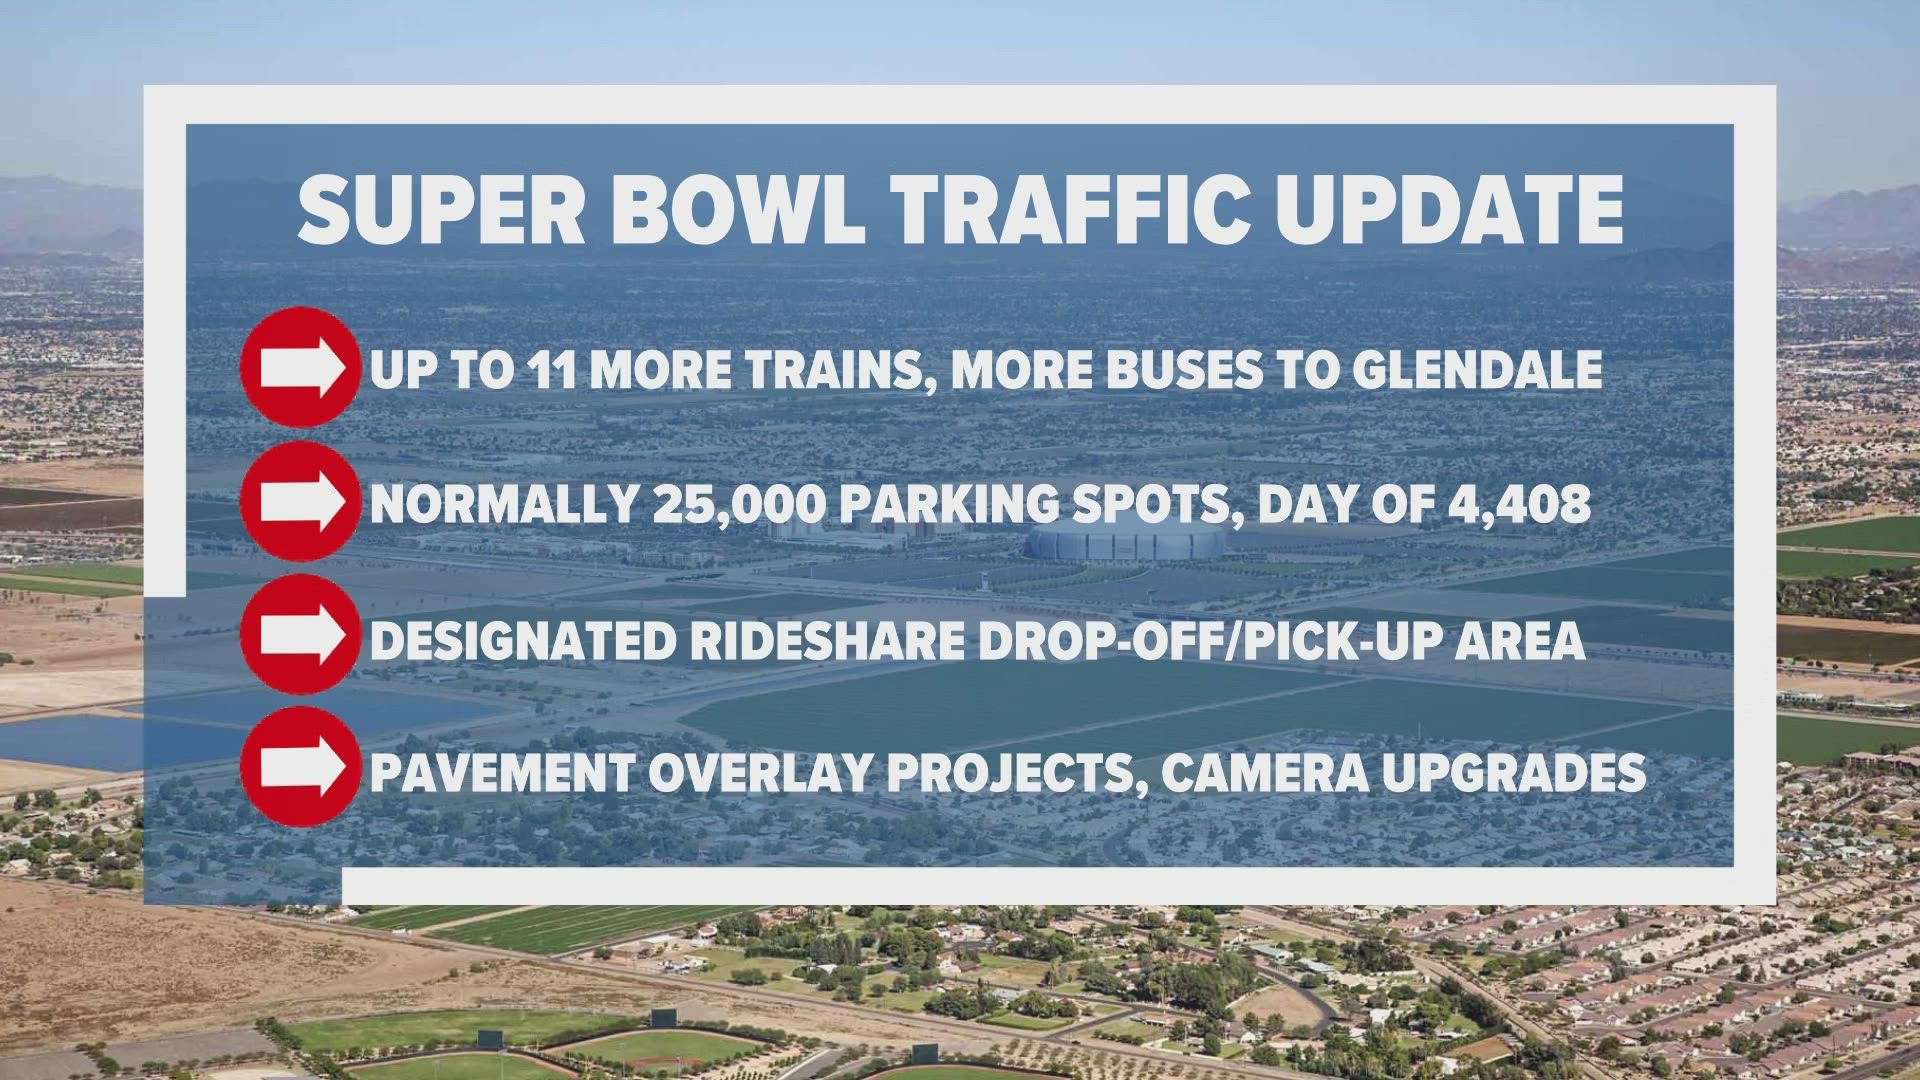 The City of Glendale gives a preview on traffic impacts, challenges, and improvements coming for Super Bowl LVII.